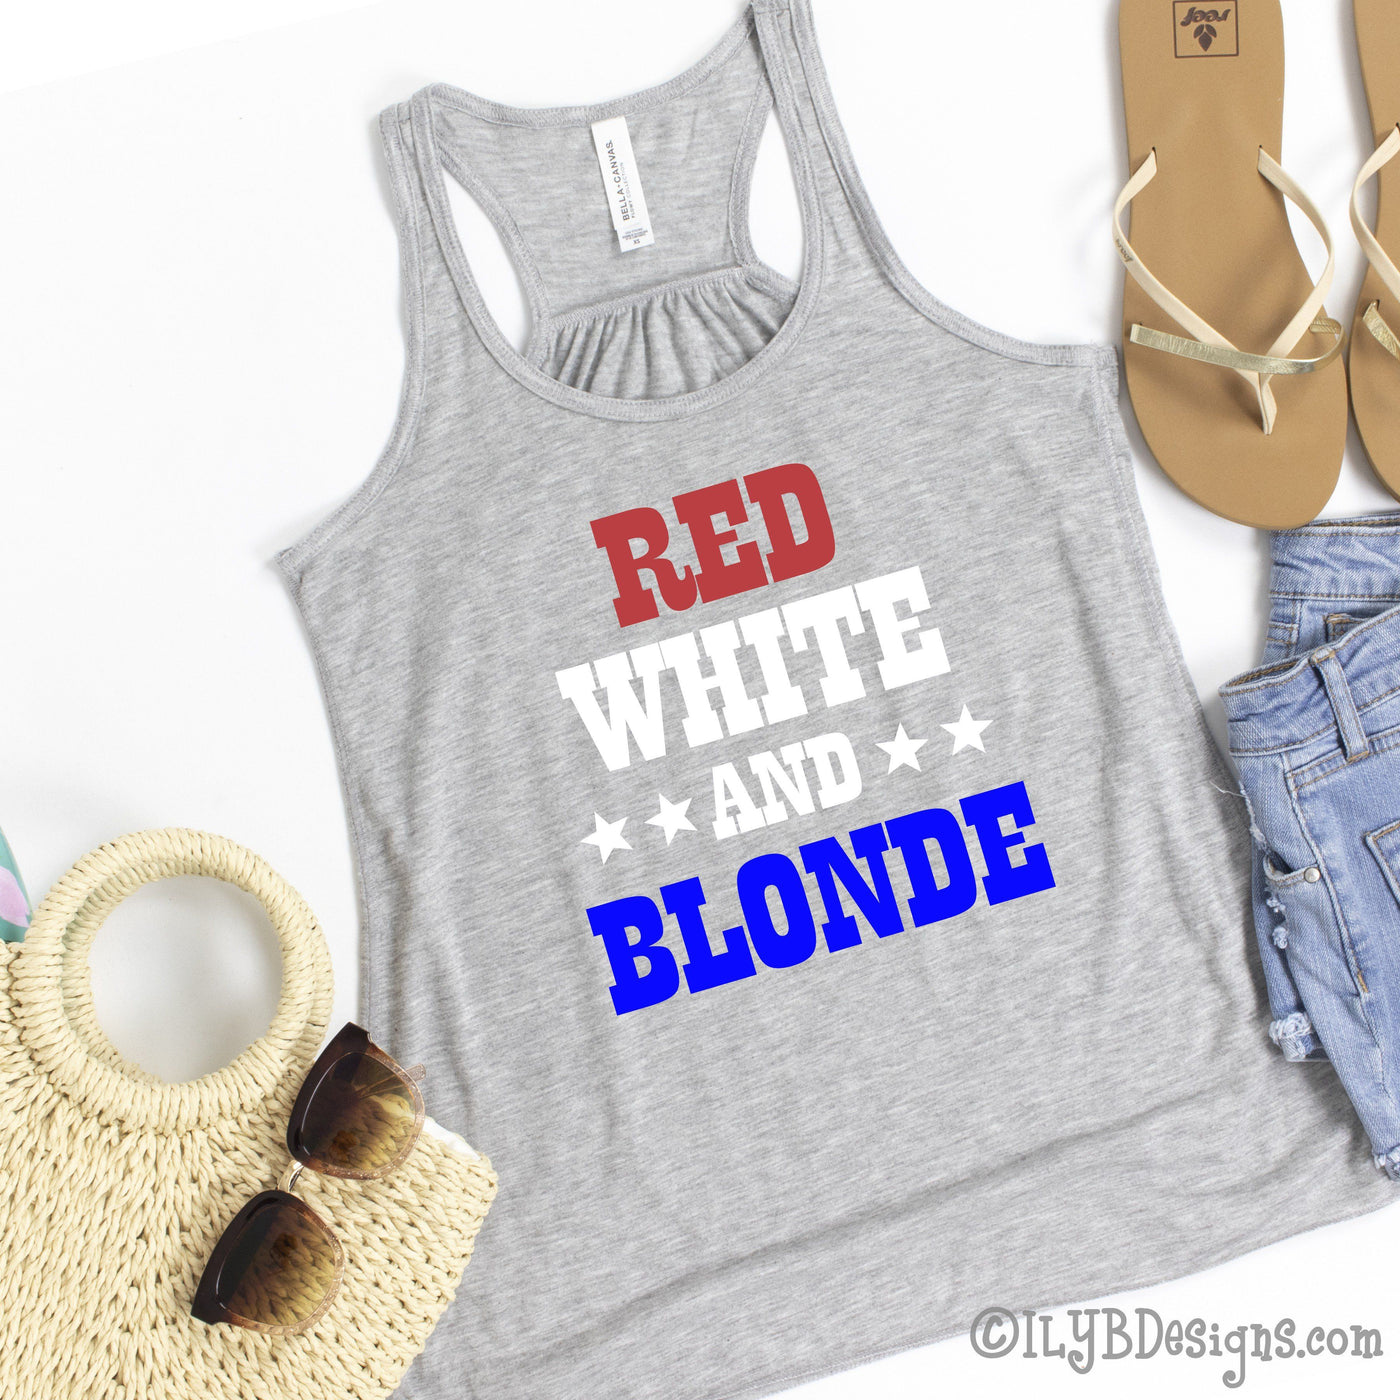 Red White and Blonde Tank Top